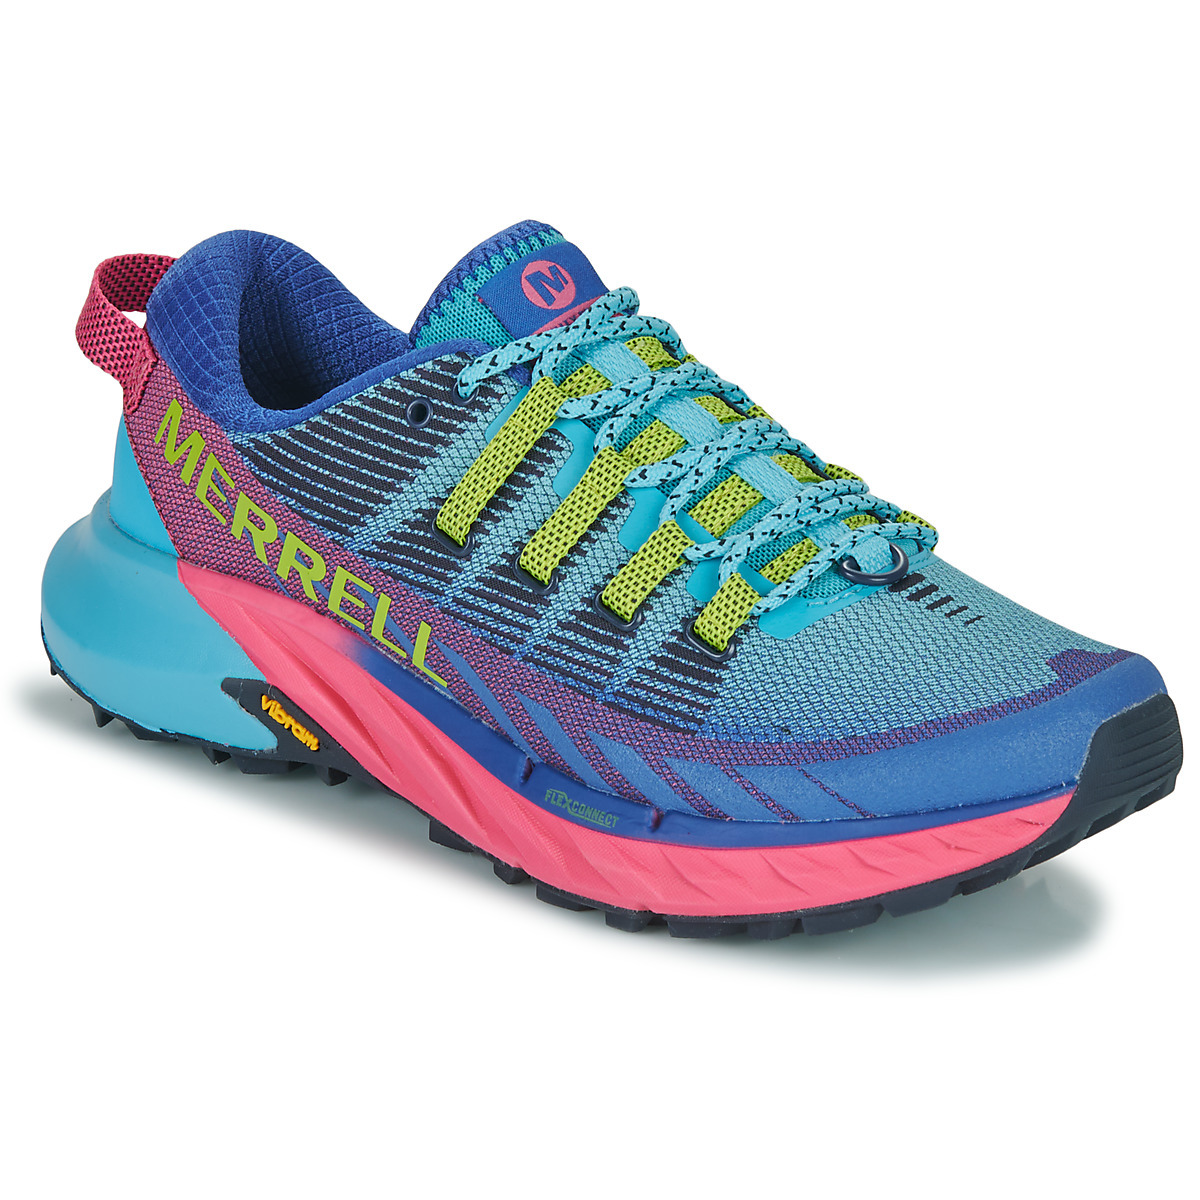 Spartoo Women Running Shoes in Blue by Merrell GOOFASH